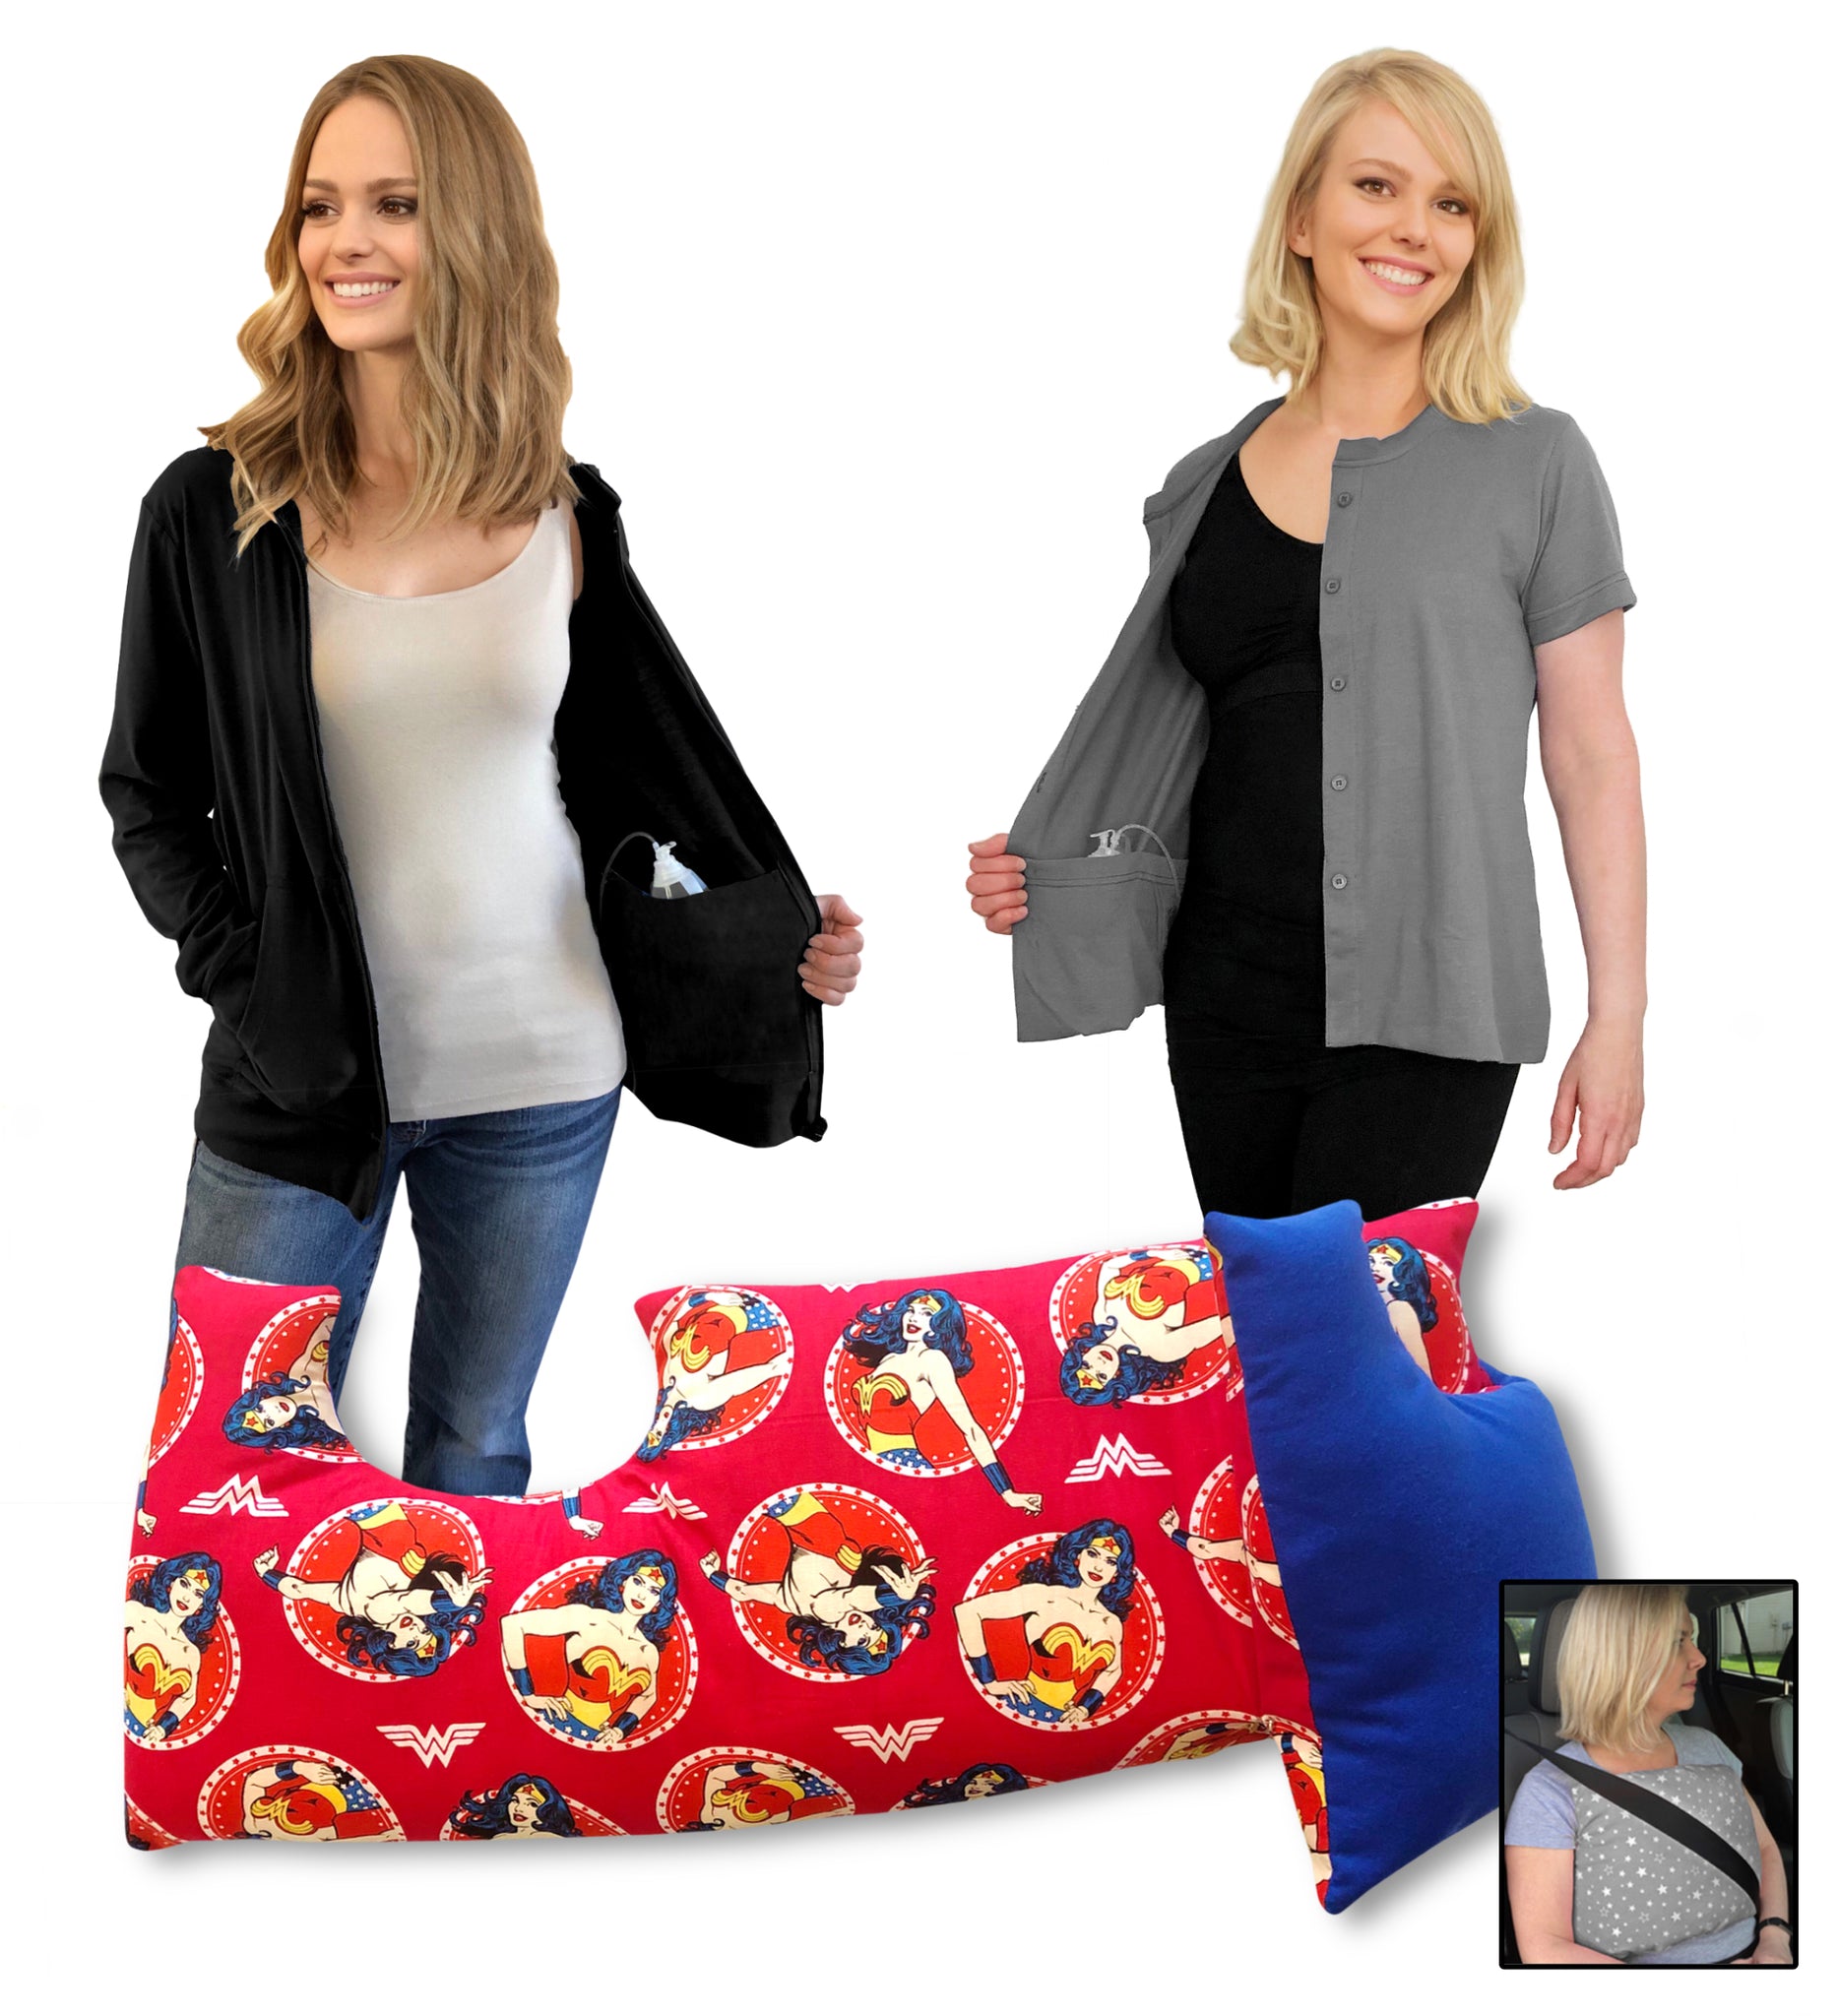 3 Pack MASTECTOMY Kit Must Have SHIRT and Chest PILLOW (pwp,T1,Hb) 3+ discount included!